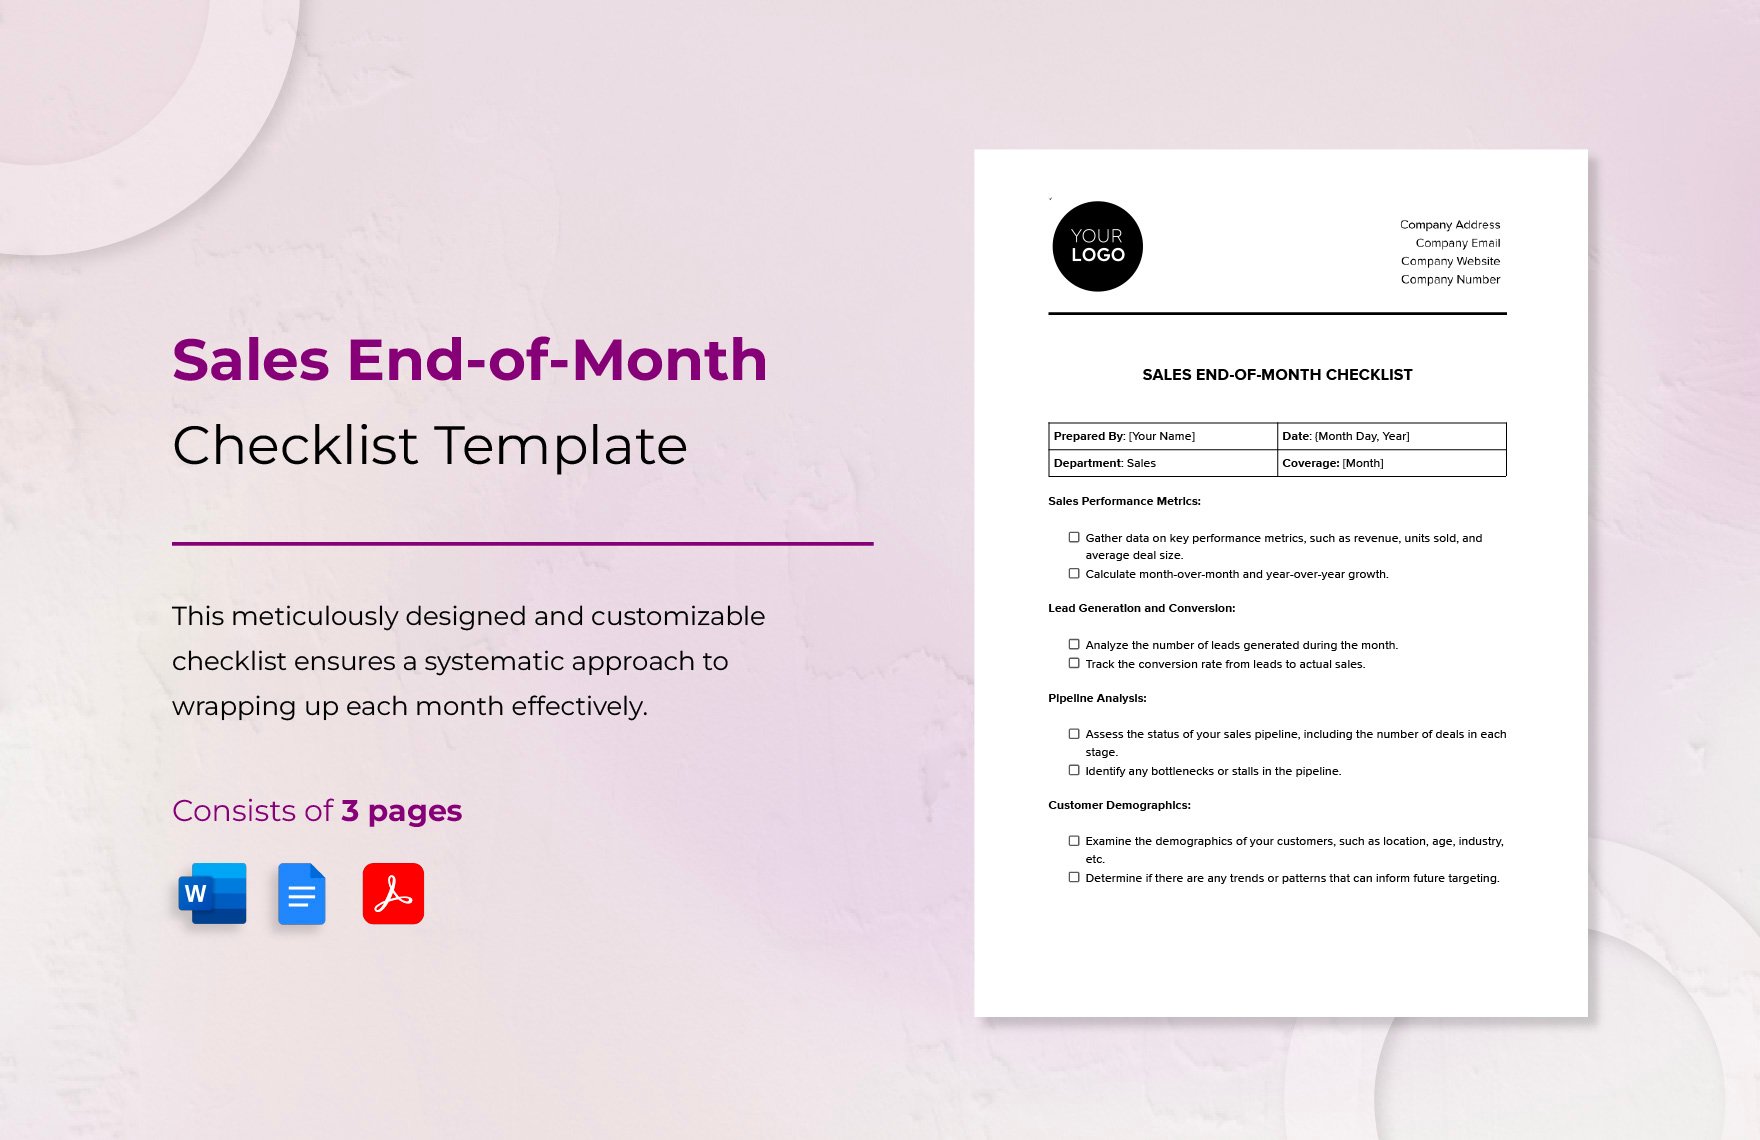 Sales End-of-Month Checklist Template